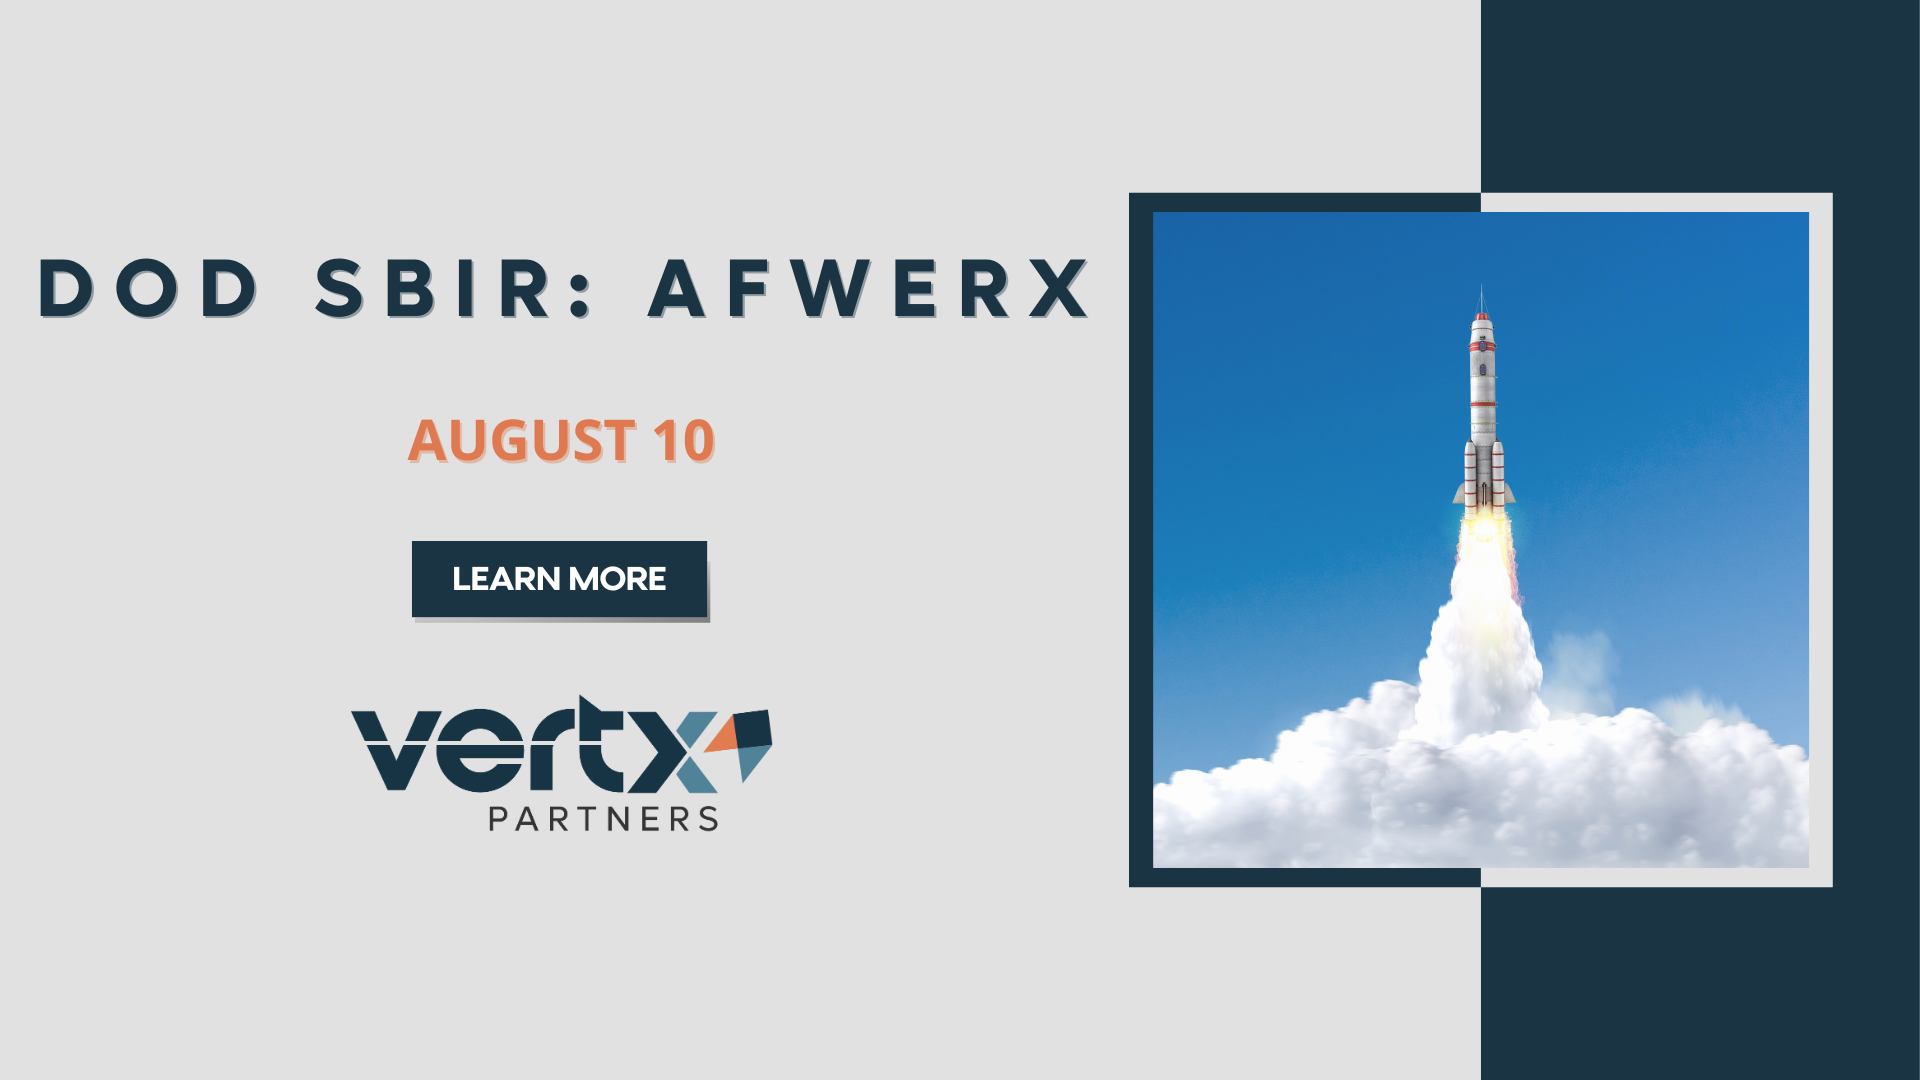 This graphic has the title "DoD SBIR: AFWERX" with the date August 10 underneath it and a photo of a rocket flying into space with a blue sky in the background to the right of it.